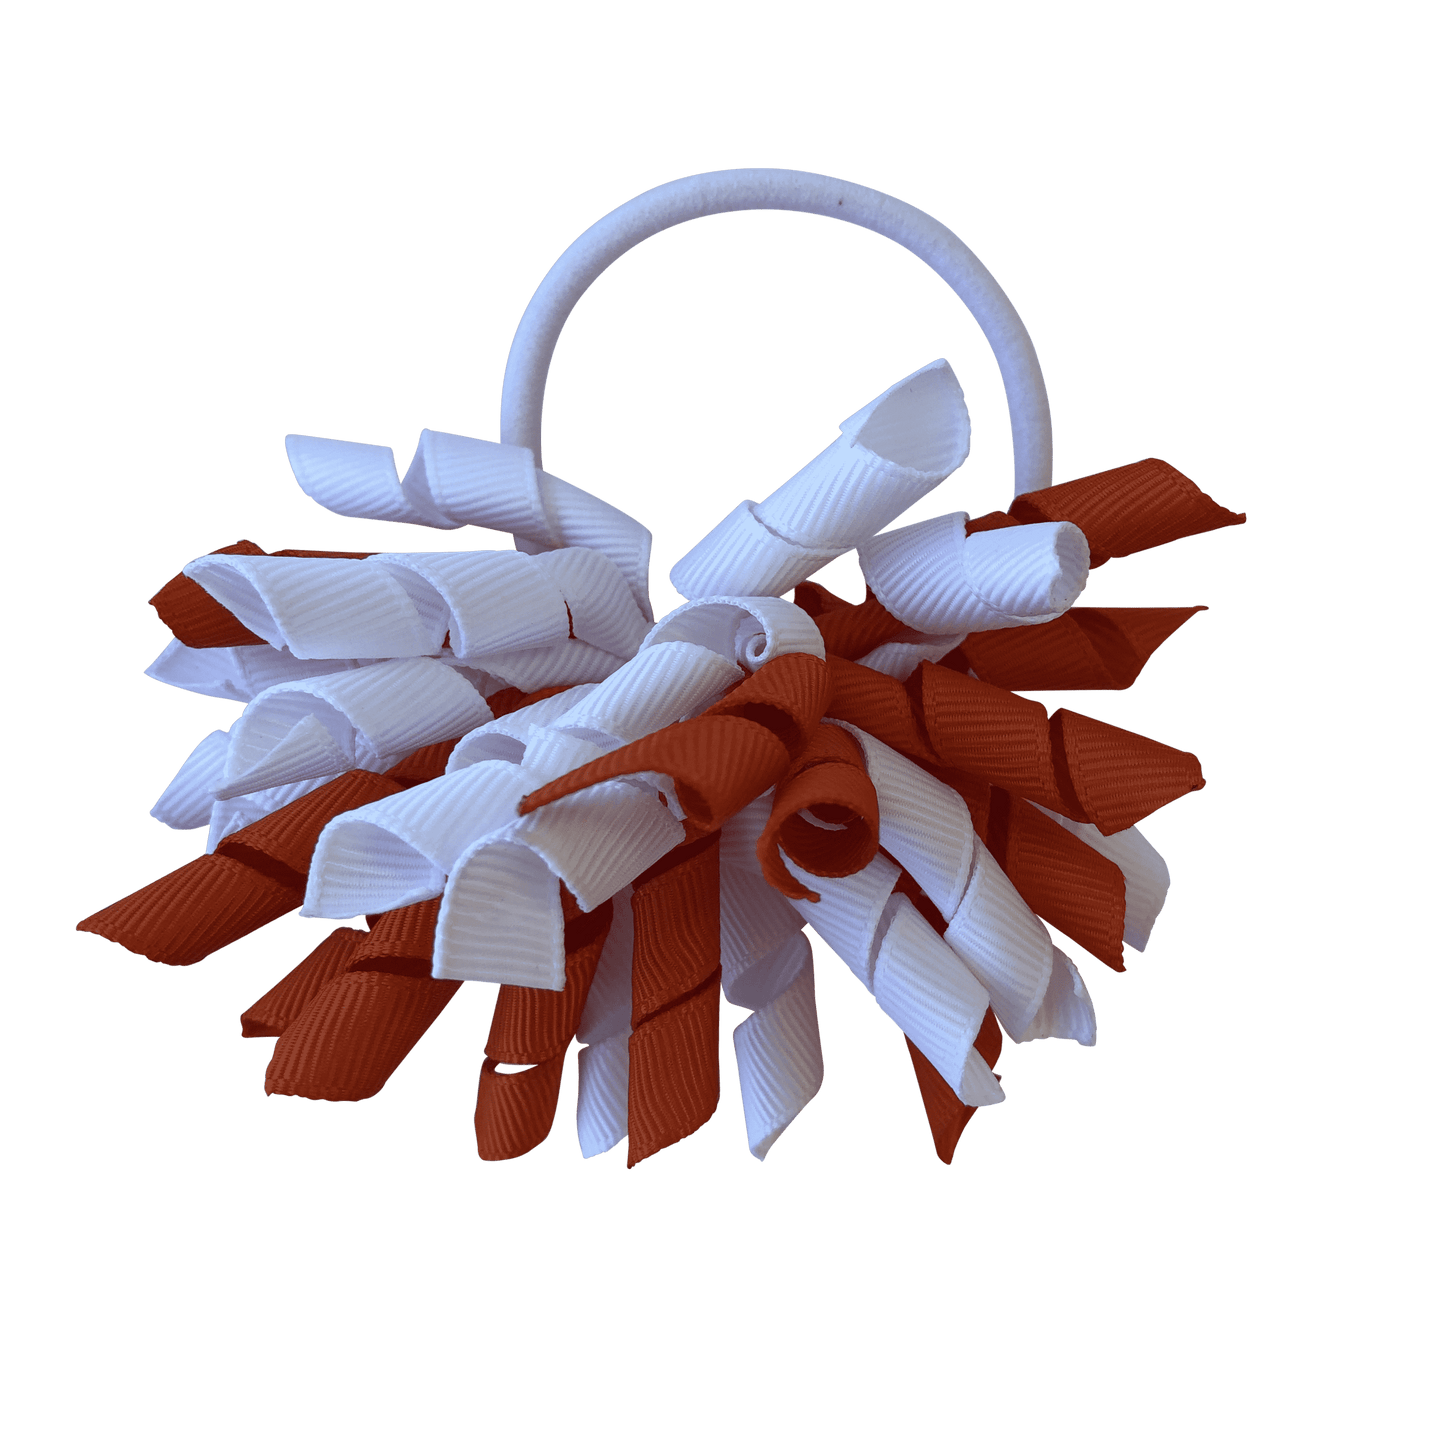 Orange & White Hair Accessories - Assorted Hair Accessories - School Uniform Hair Accessories - Ponytails and Fairytales